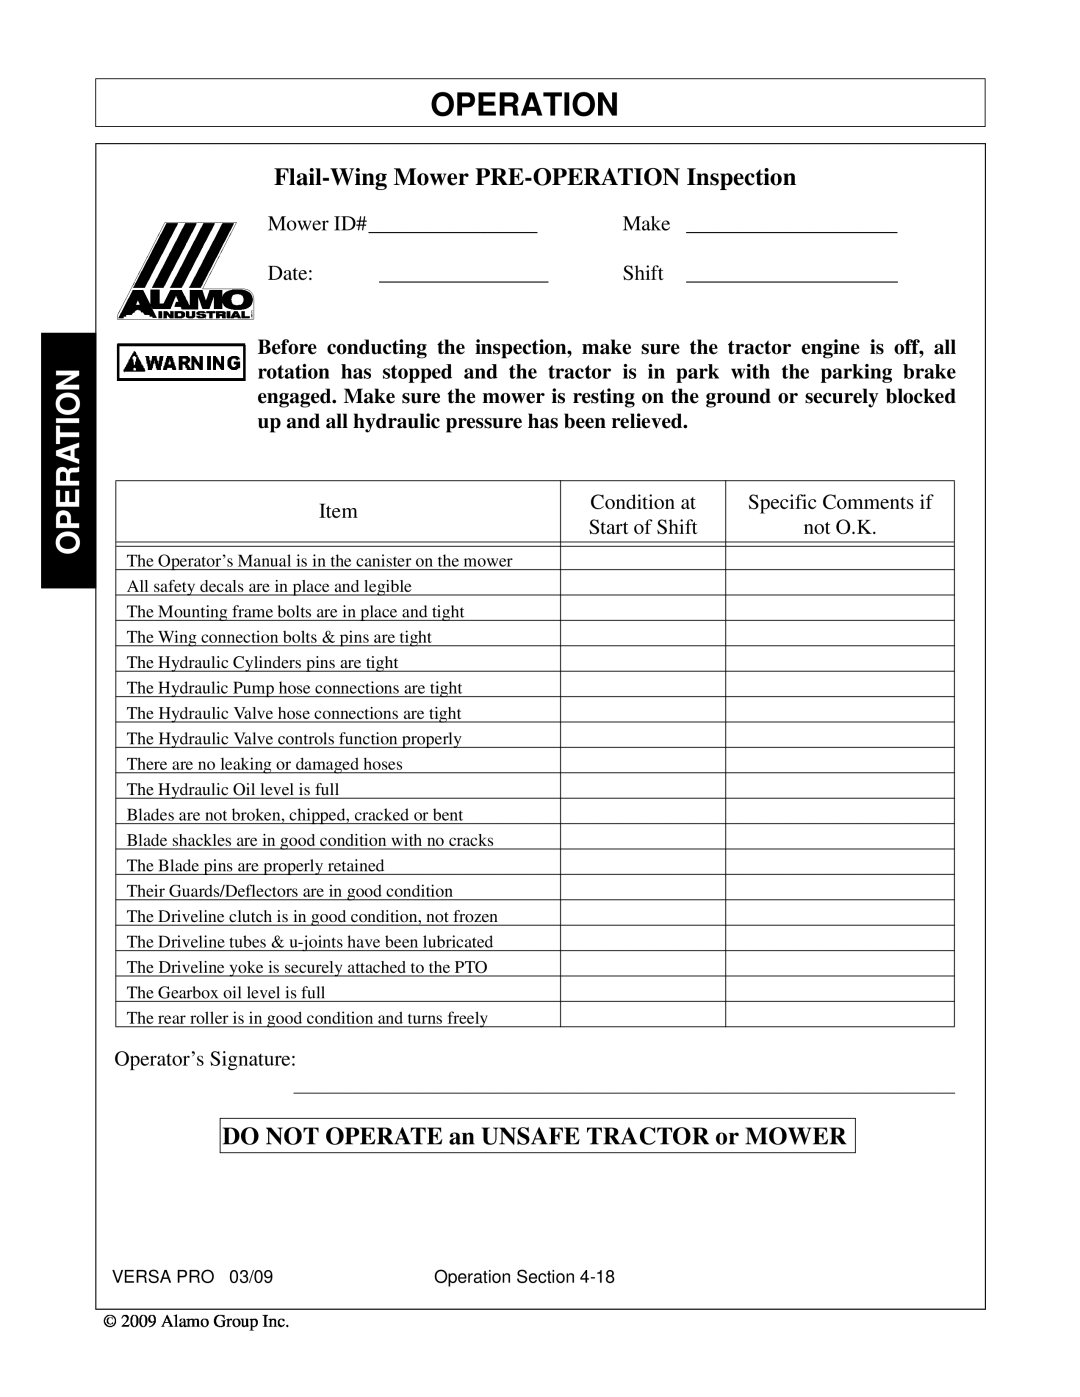 Alamo 803350C manual Flail-WingMower PRE-OPERATIONInspection, DO NOT OPERATE an UNSAFE TRACTOR or MOWER, Operation 